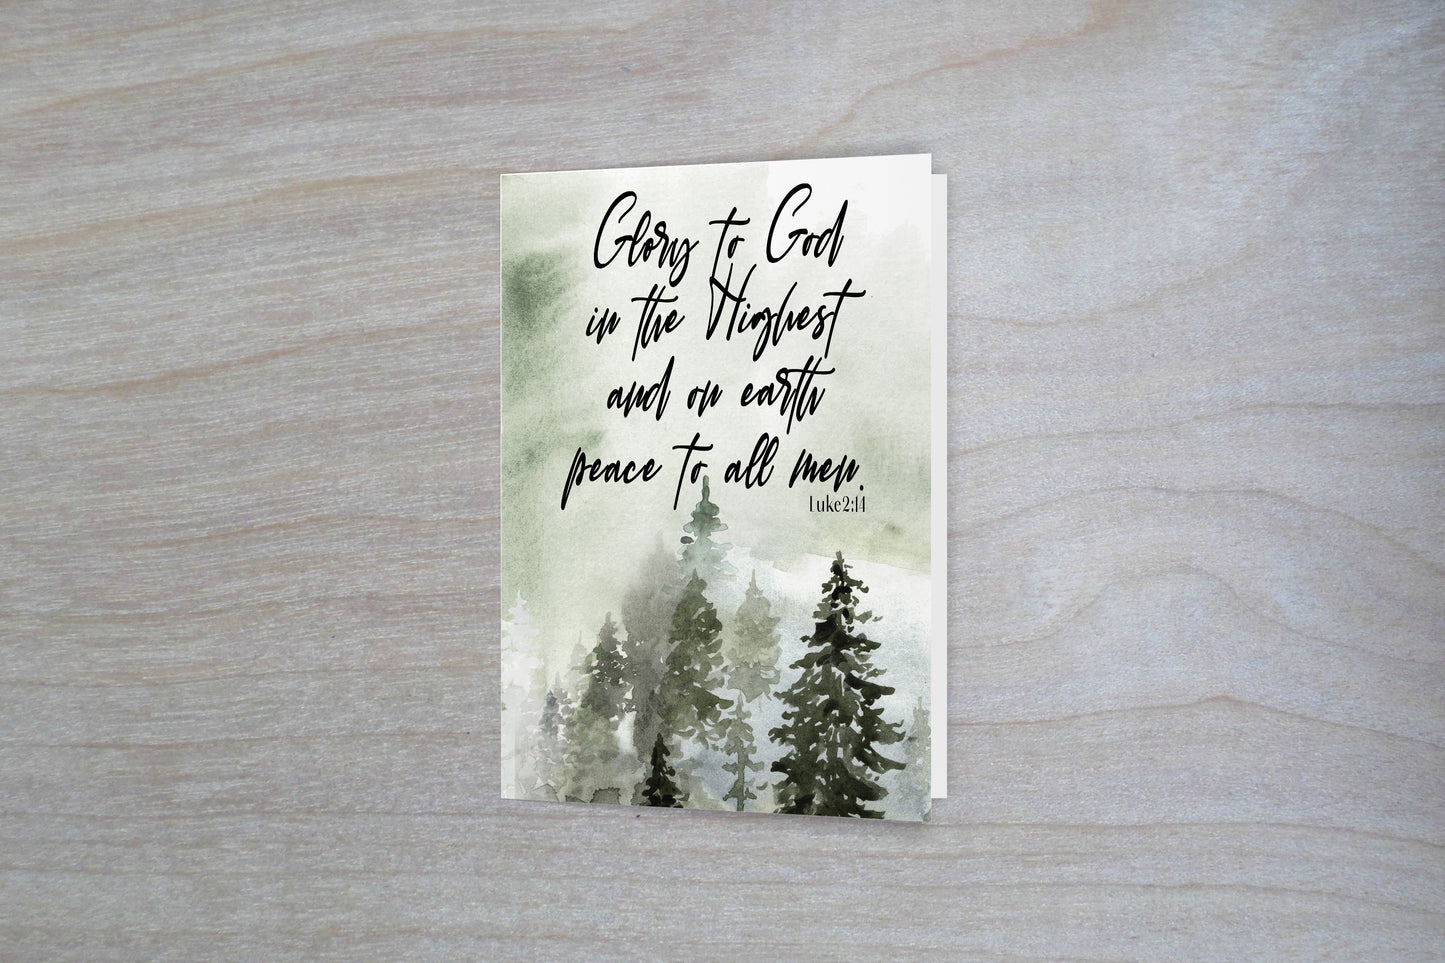 Glory To God Christmas Cards - Includes 25 cards